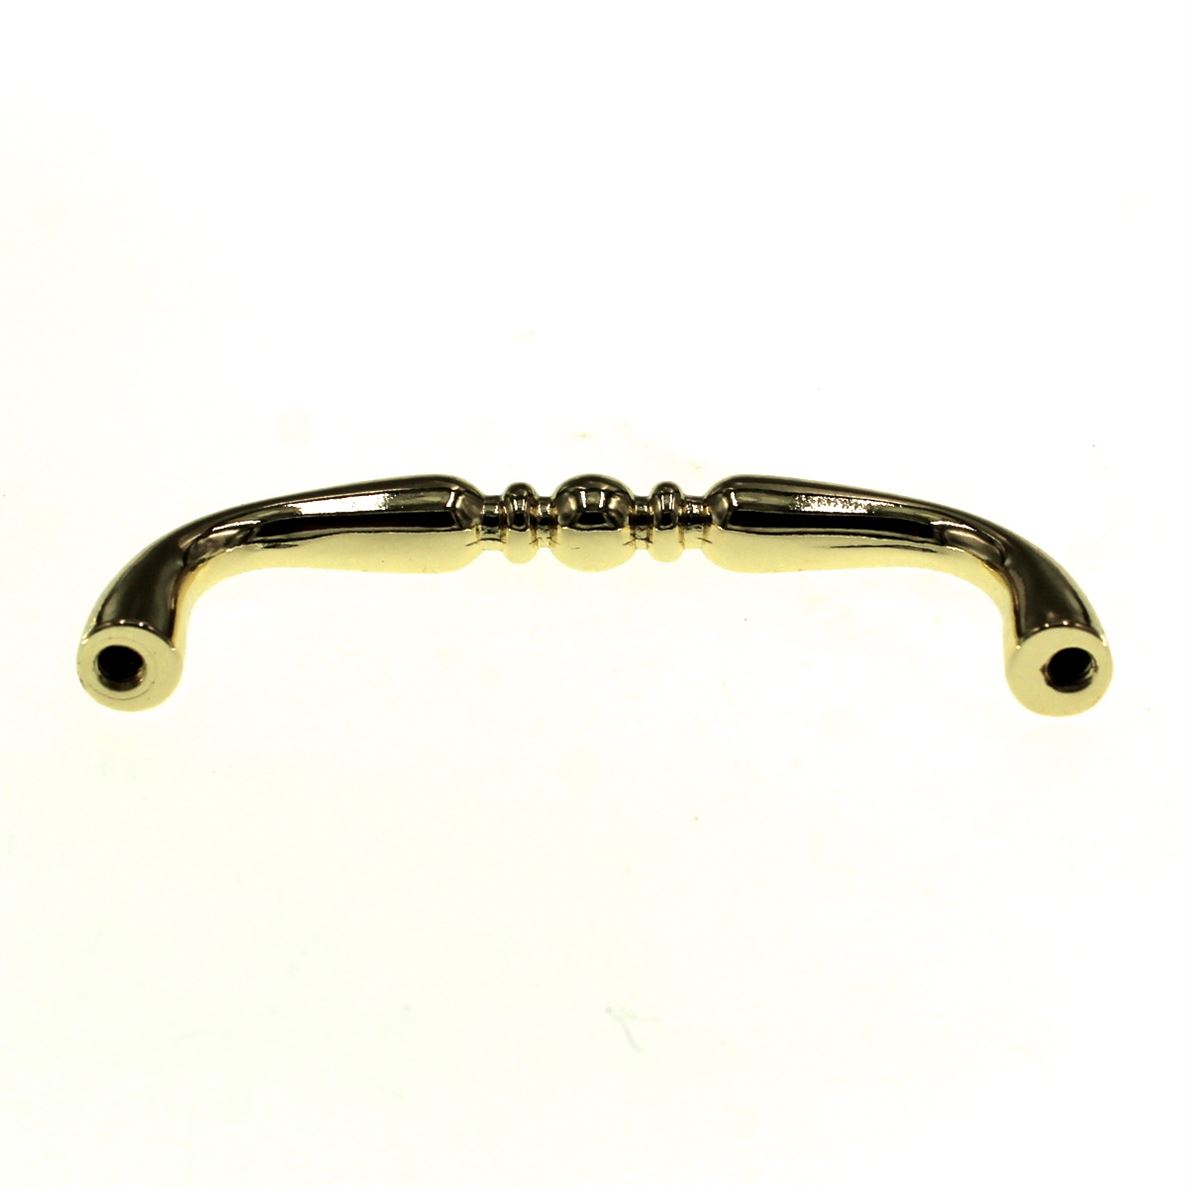 Belwith Conquest Polished Brass 3" Ctr. Cabinet Arch Pull Handle P14451-3